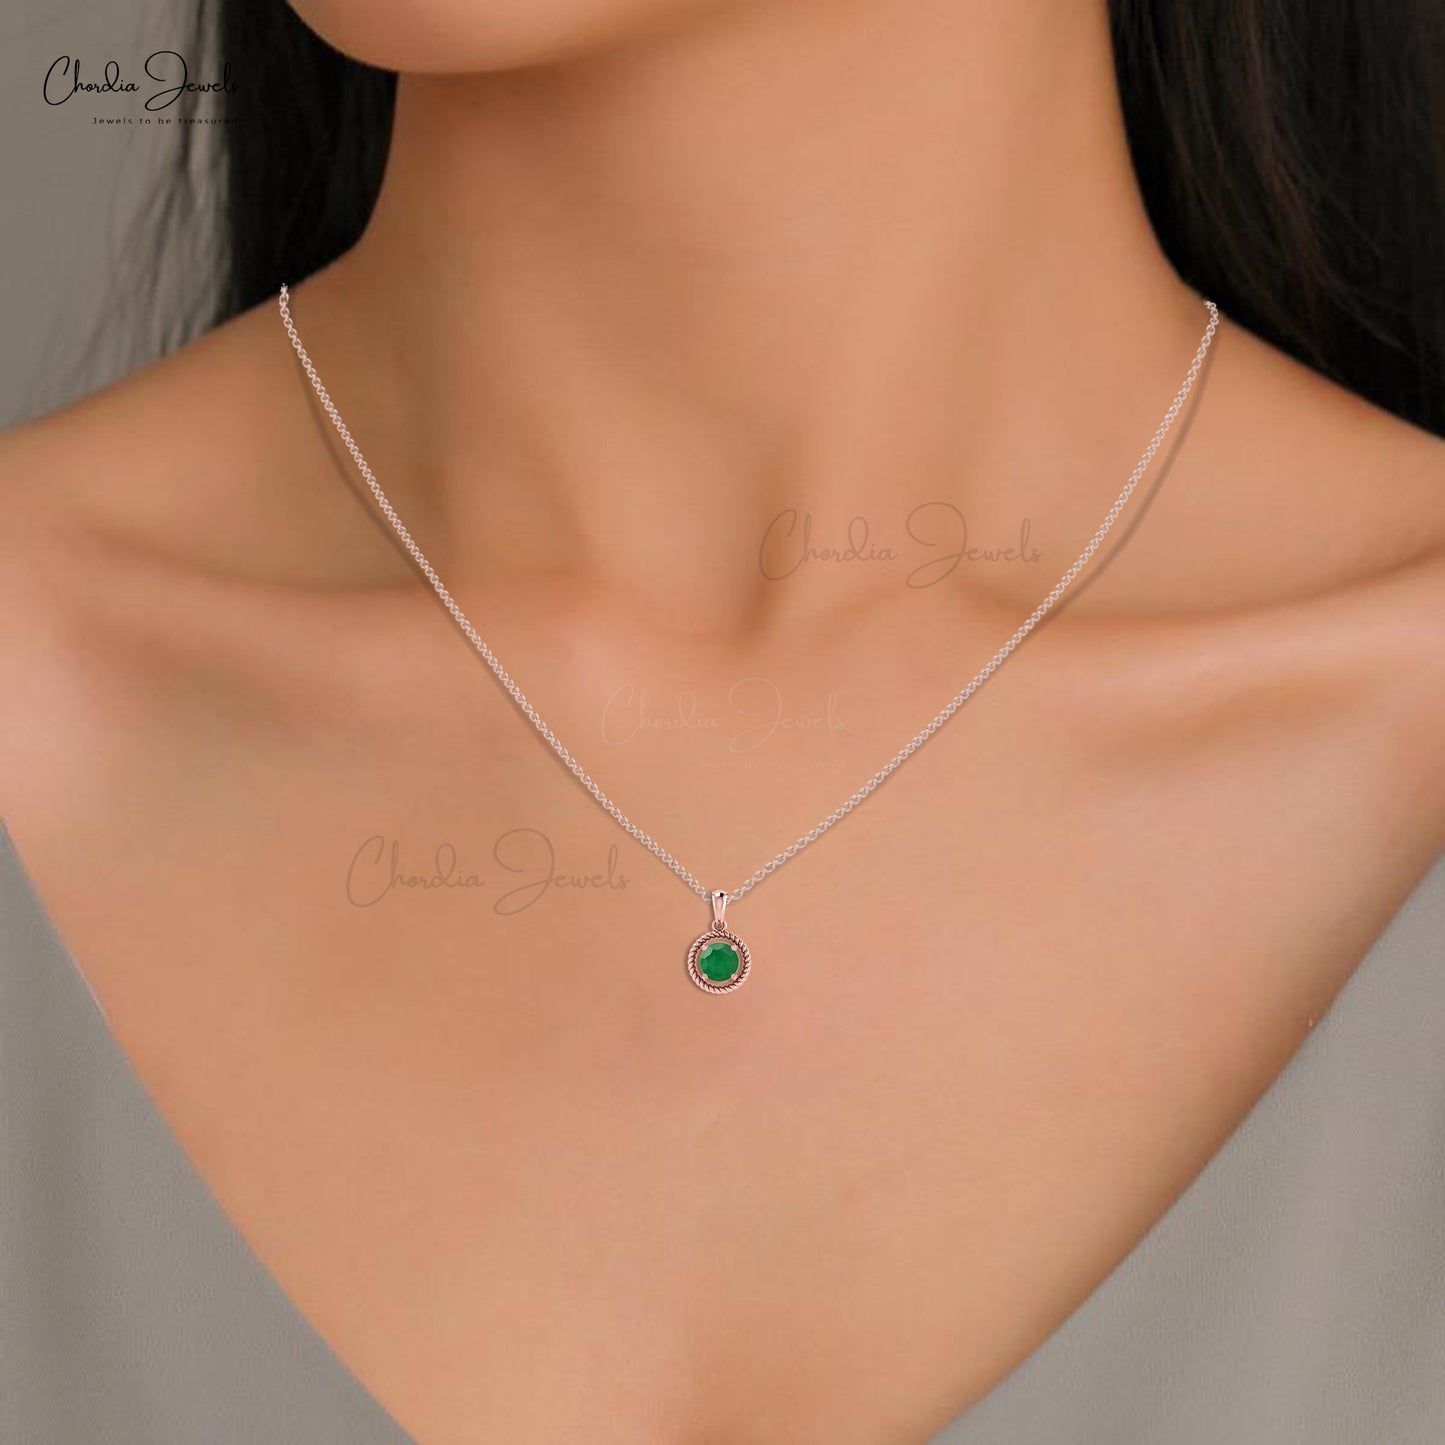 Solitaire Spiral Pendant With Genuine Emerald 14K Solid Gold Prong Set Pendant For Wife